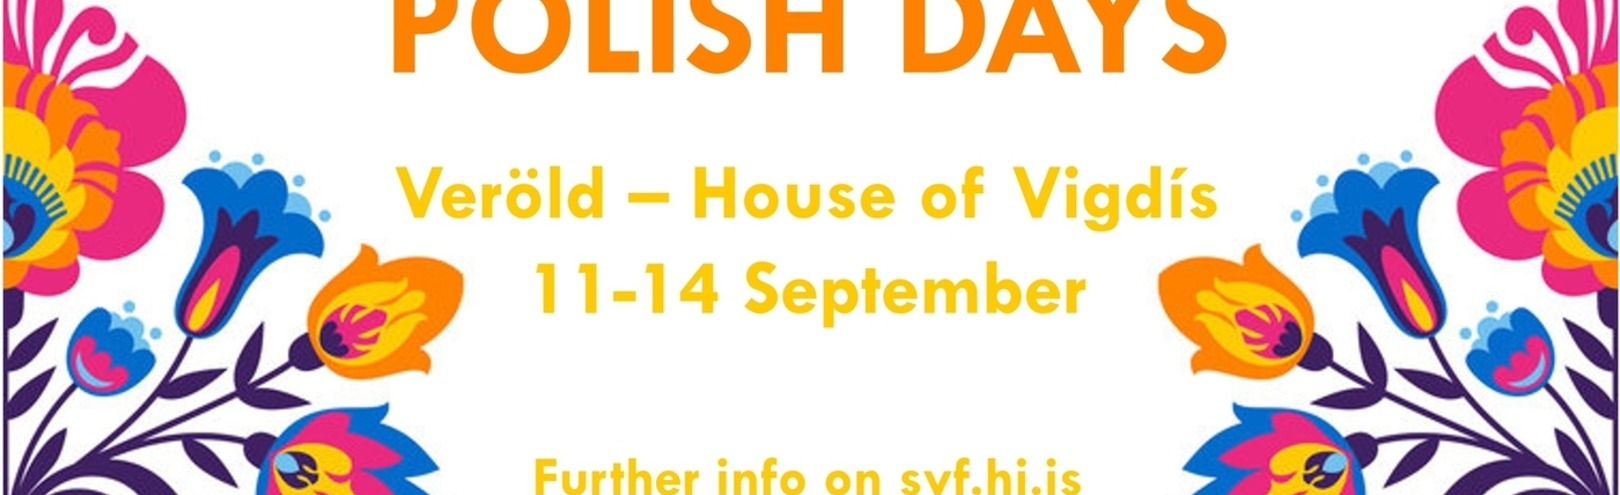 Polish days in the UI Language Centre - Available at University of Iceland